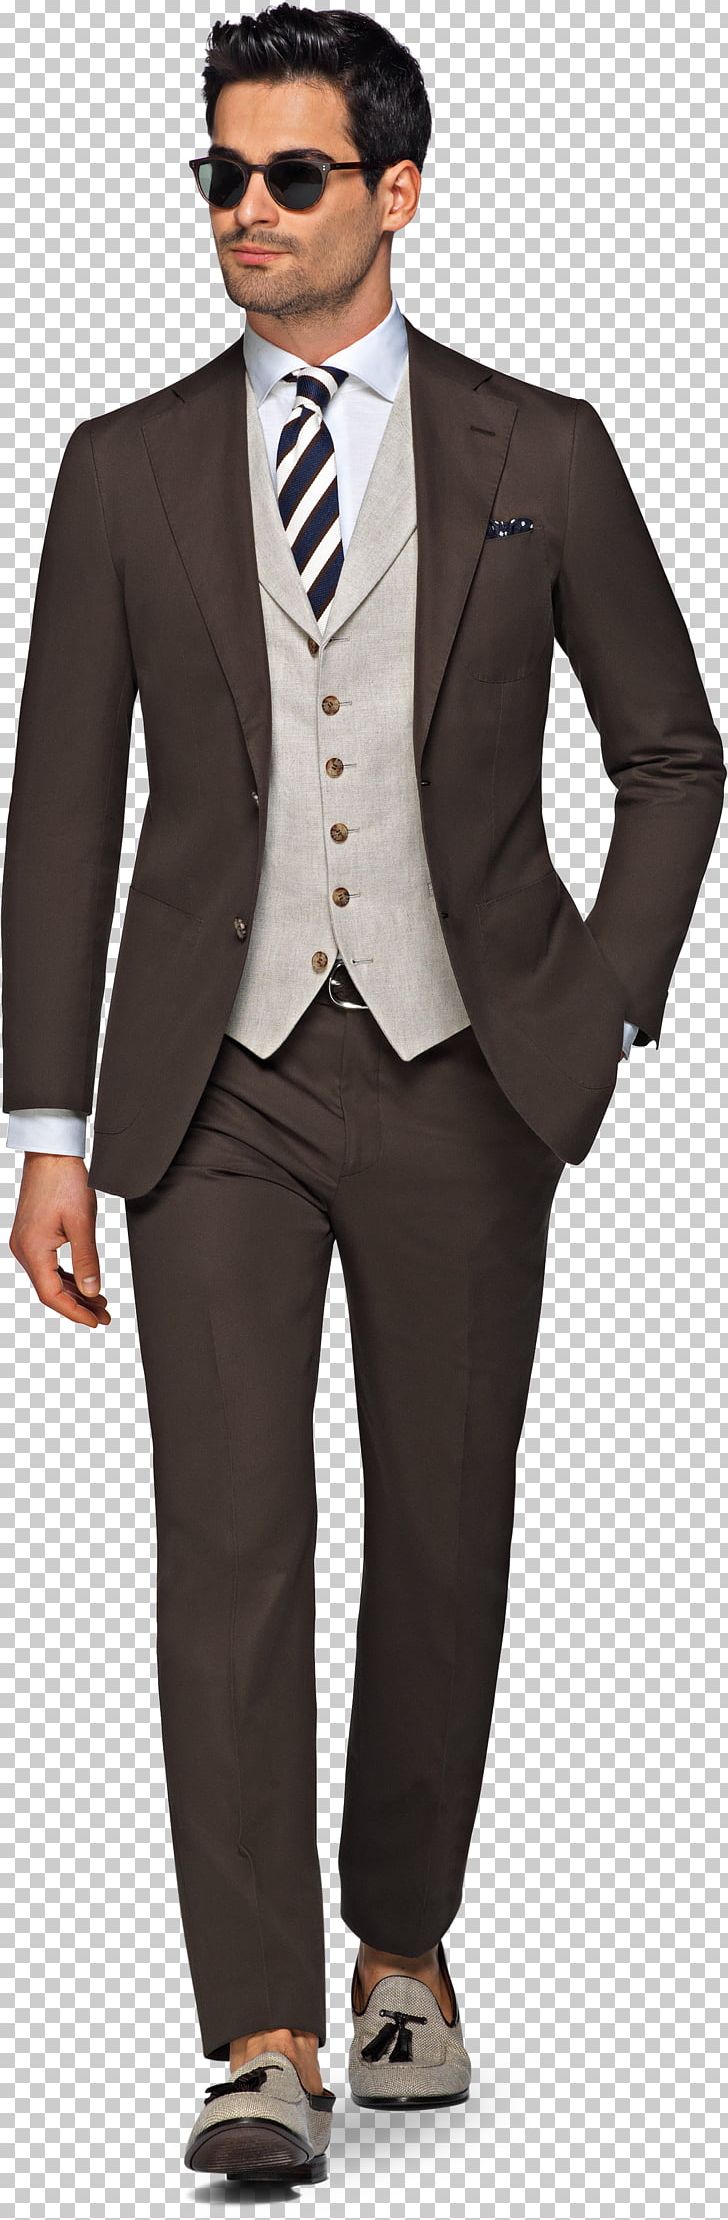 Leather Jacket Suitsupply Tuxedo PNG, Clipart, Black Tie, Blazer, Businessperson, Clothing, Coat Free PNG Download